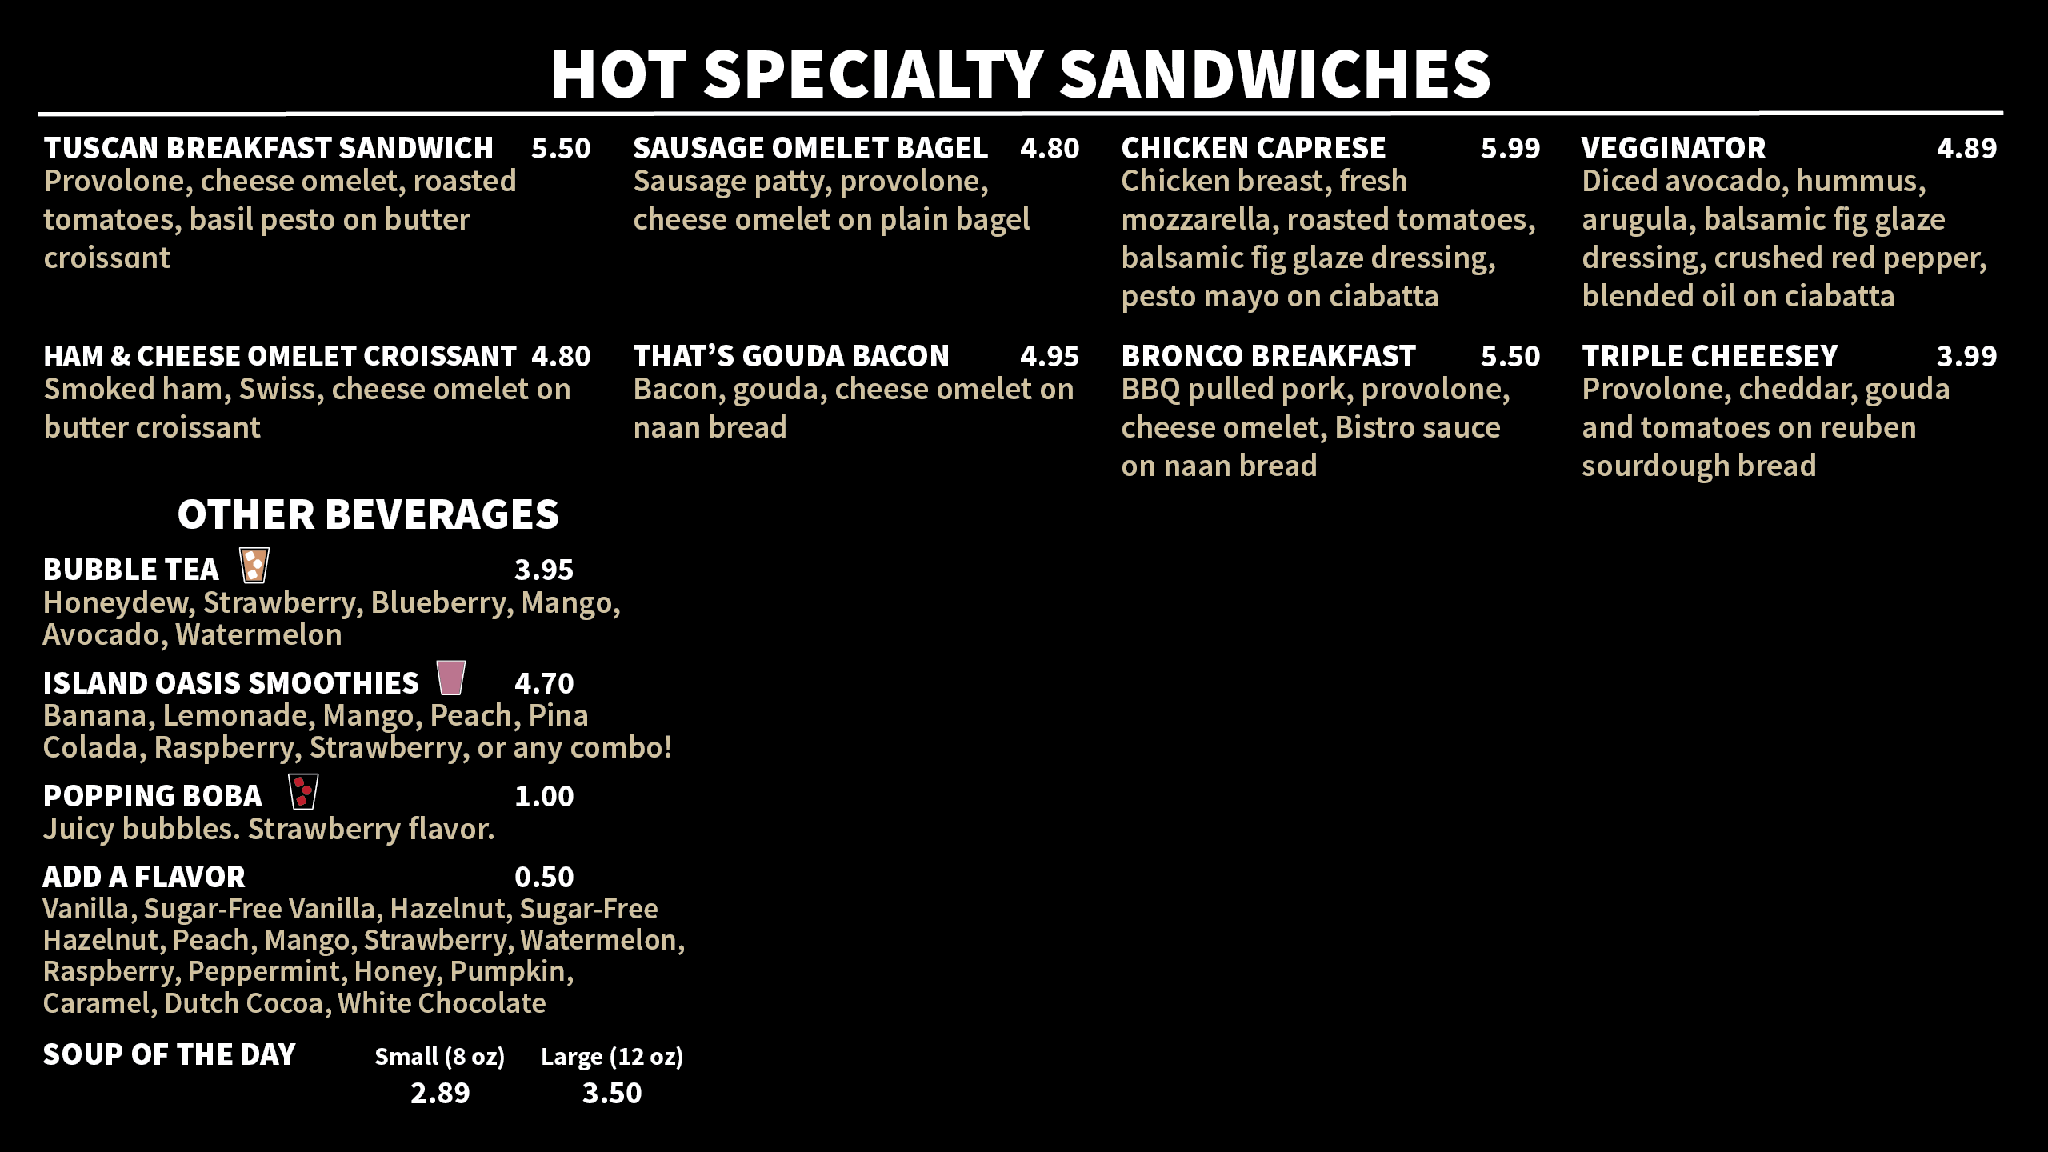 The Bookmark Hot Specialty Sandwiches